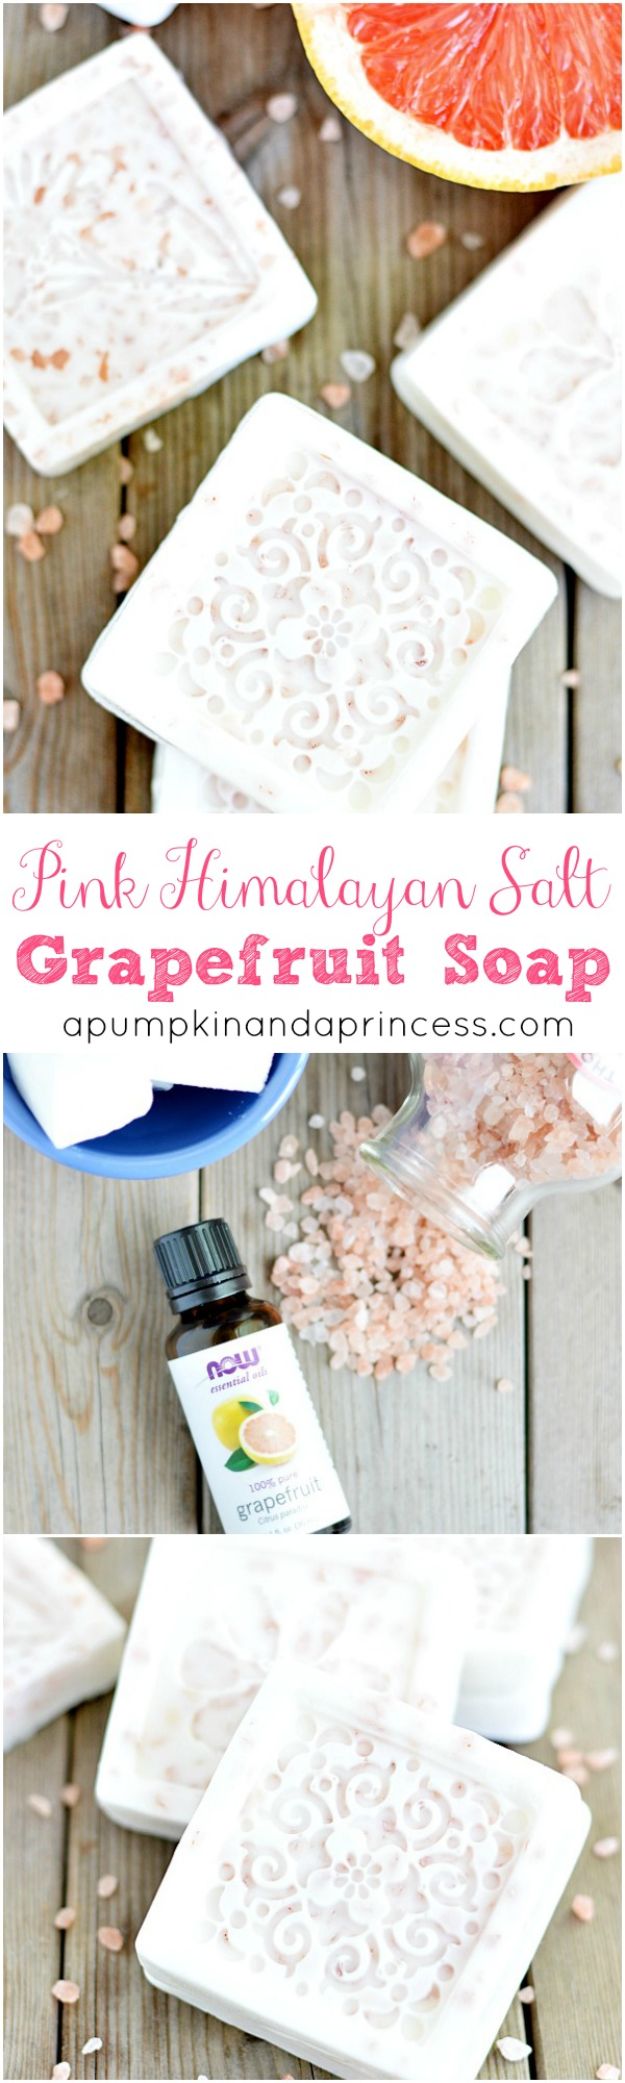 Cool Soaps To Make At Home - Pink Himalayan Salt Grapefruit Soap - DIY Soap Recipes and Ideas - Best Soap Tutorials for Soap Making Without Lye - Easy Cold Process Melt and Pour Tips for Beginners - Crockpot, Essential Oils, Homemade Natural Soaps and Products - Creative Crafts and DIY for Teens, Kids and Adults #soapmaking #diygifts #soap #soaprecipes